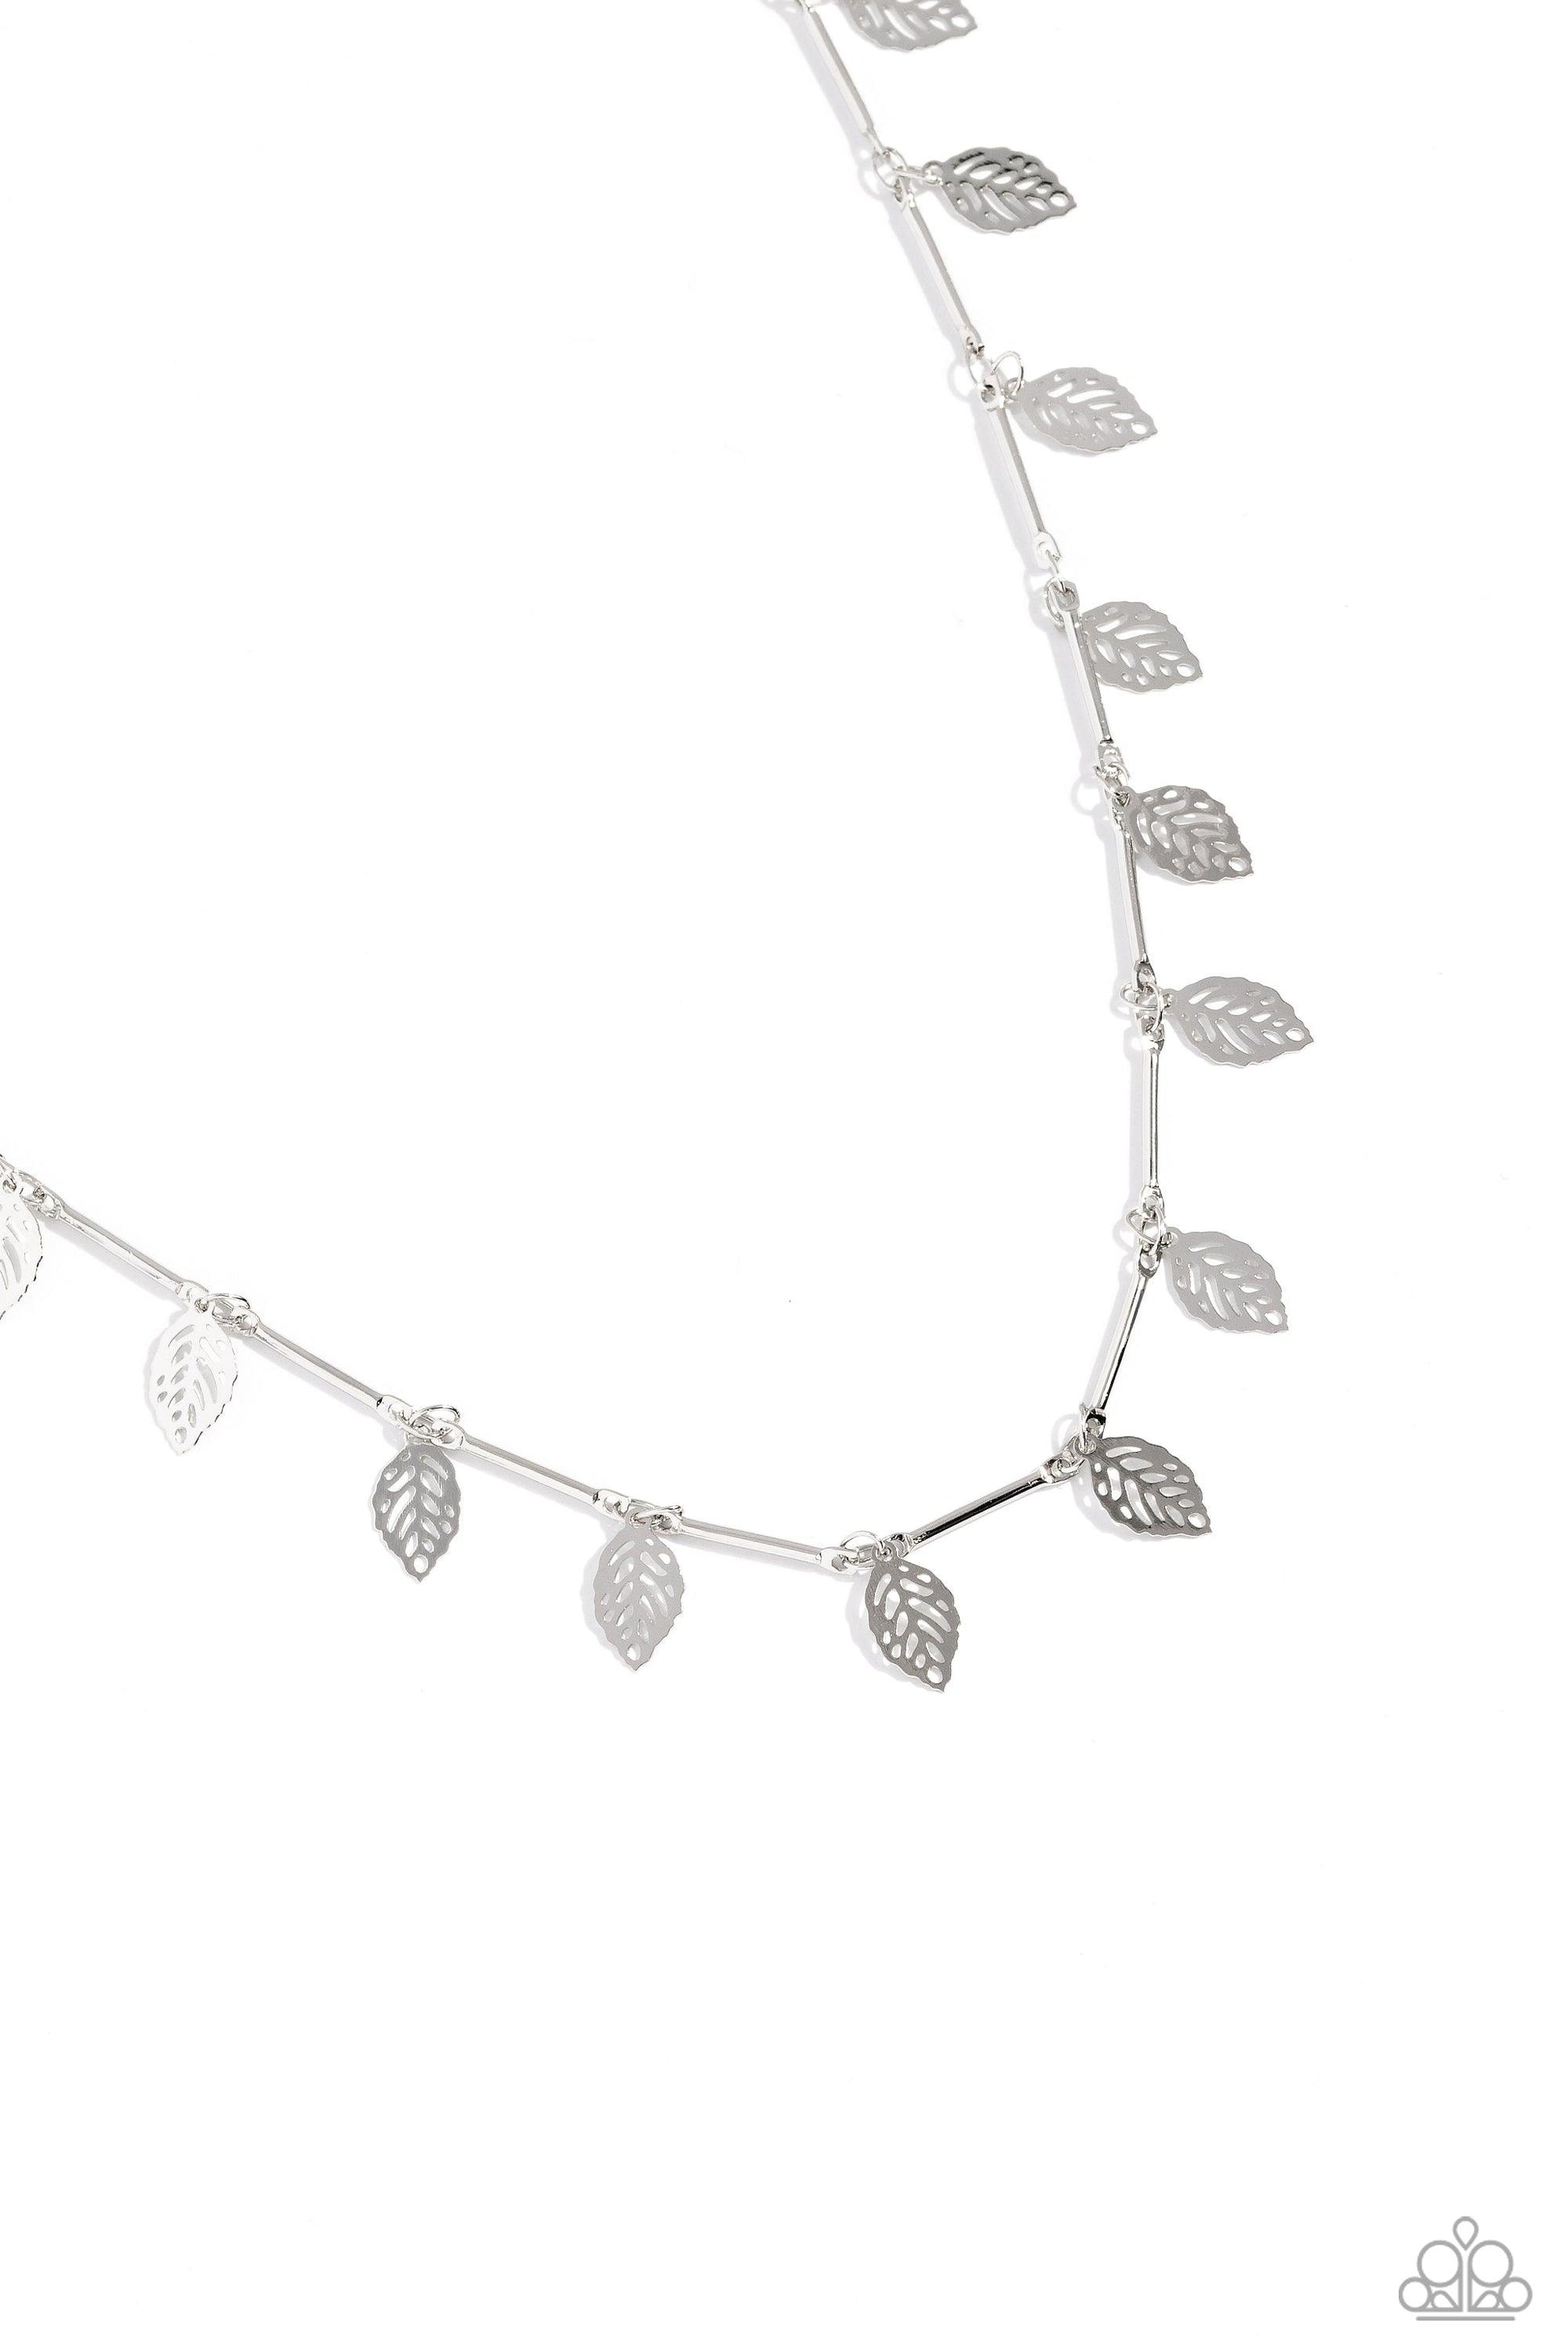 Paparazzi Accessories - LEAF a Light On - Silver Necklace - Bling by JessieK